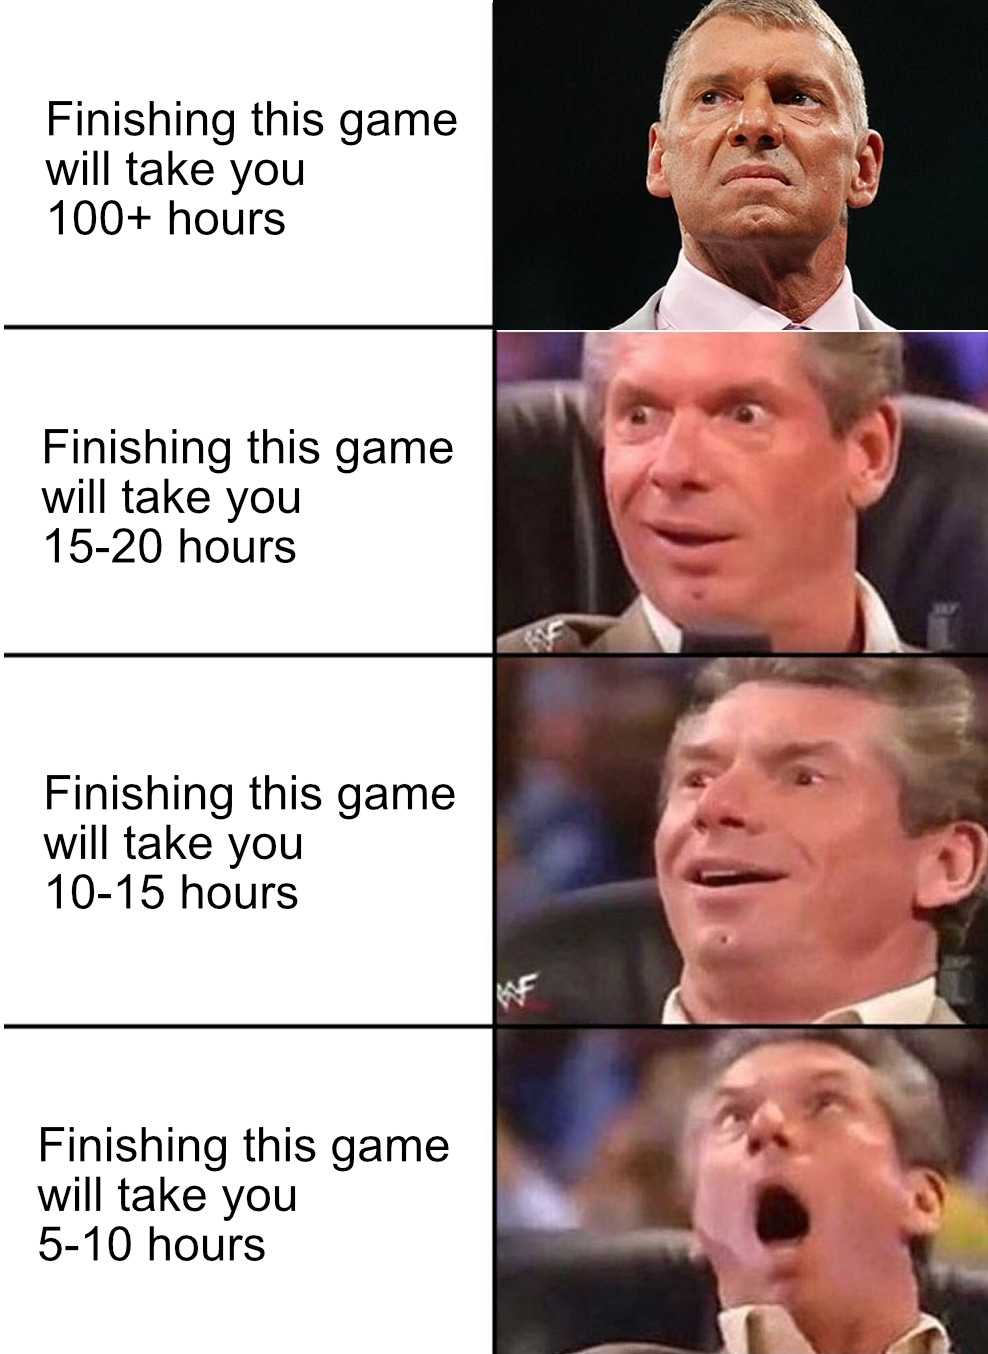 A meme of comparing game lengths to the delight and intrigue of WWE's Vince McMahon.